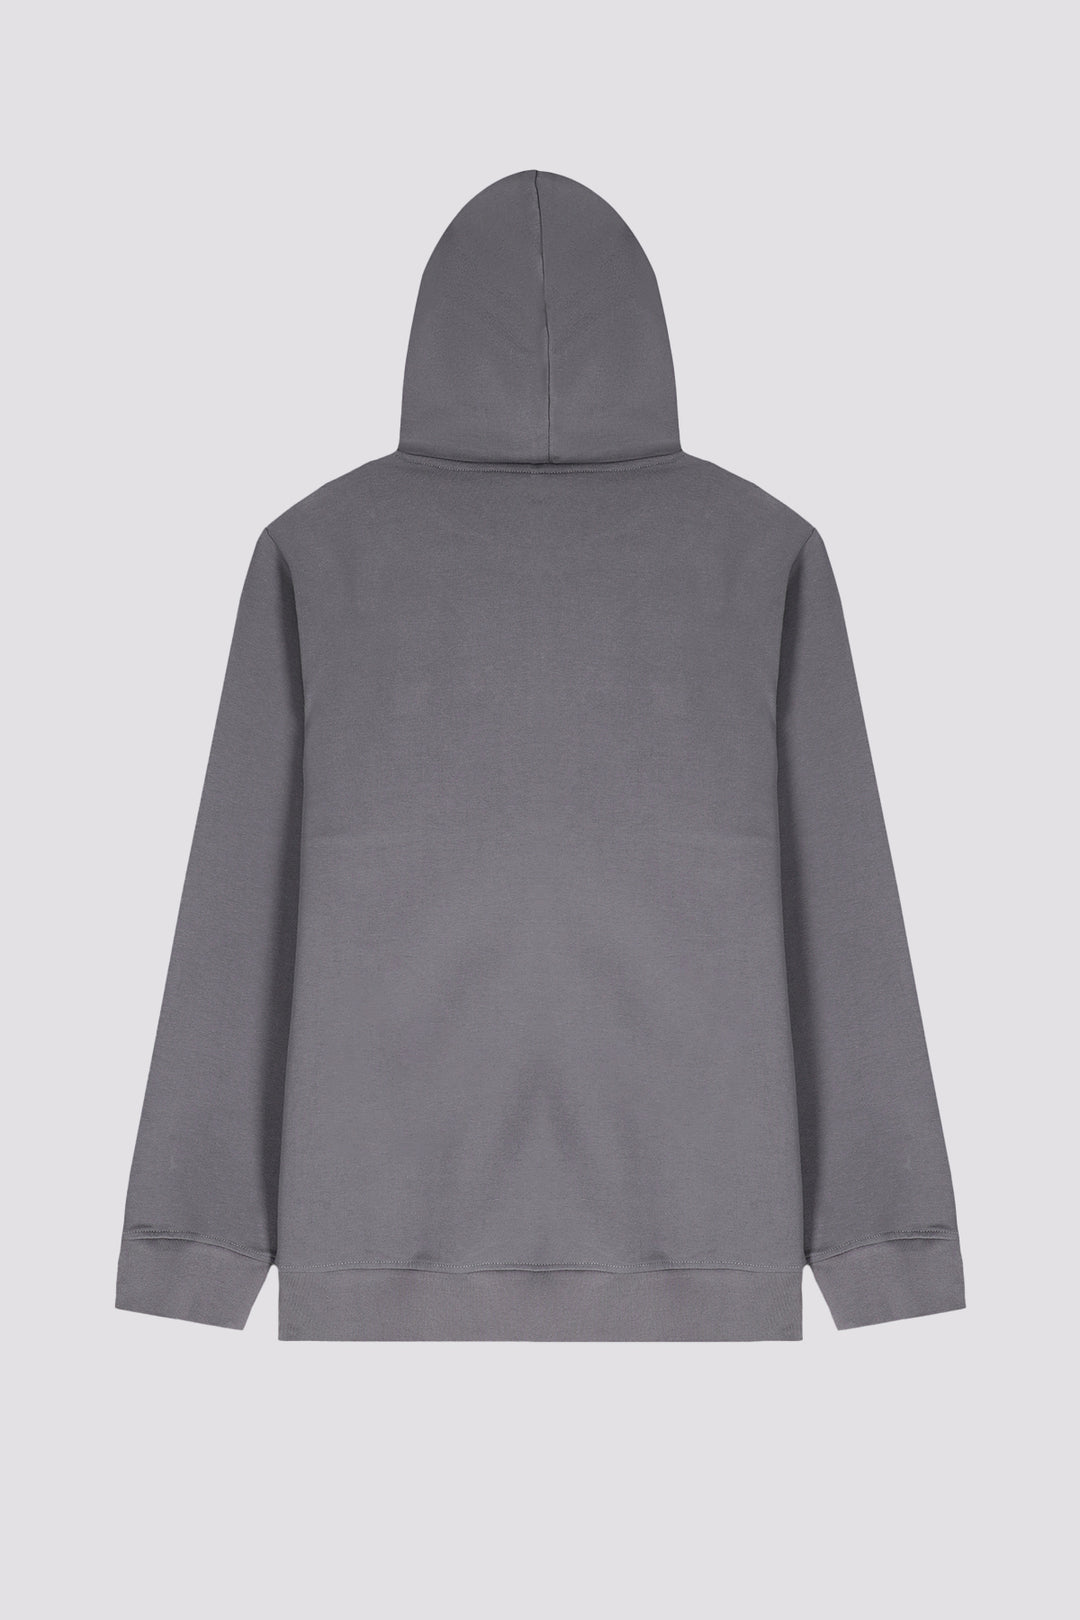 Grey New Sclothers Zipper Hoodie (Plus Size) - W23 - MH0061P